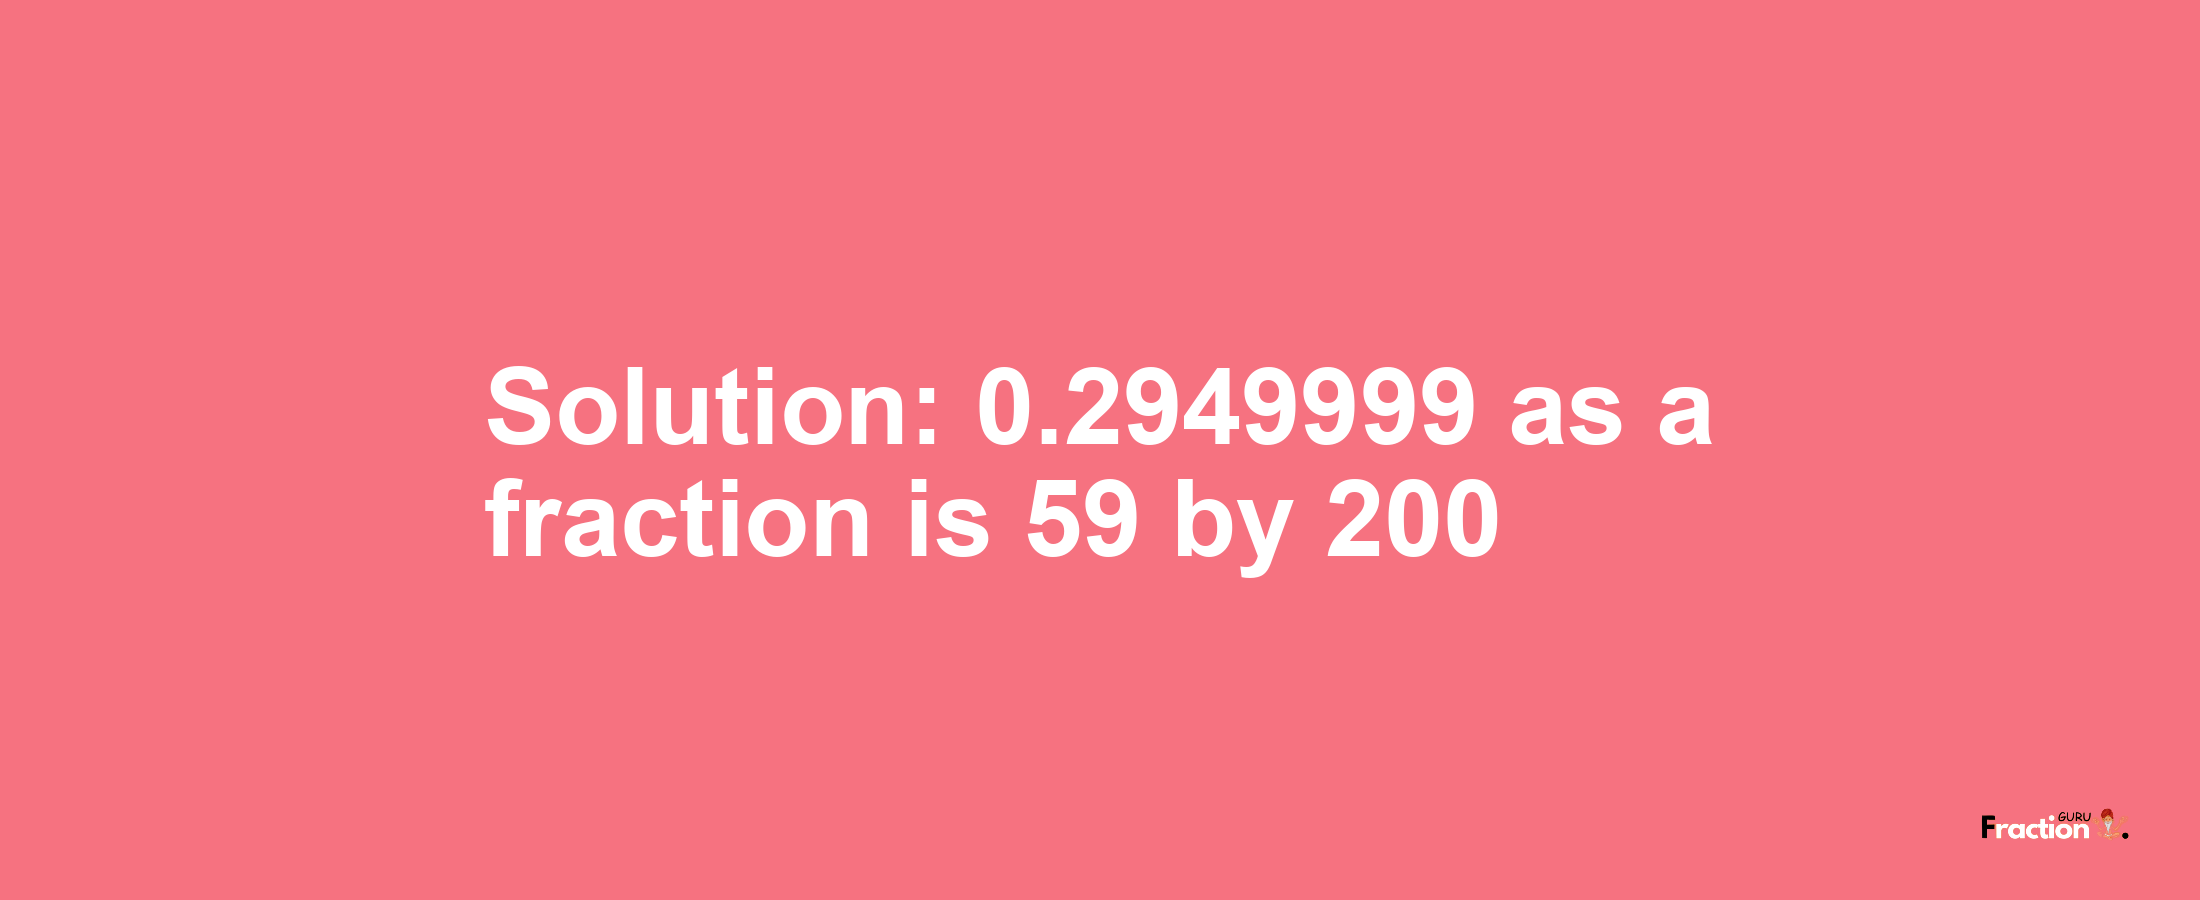 Solution:0.2949999 as a fraction is 59/200